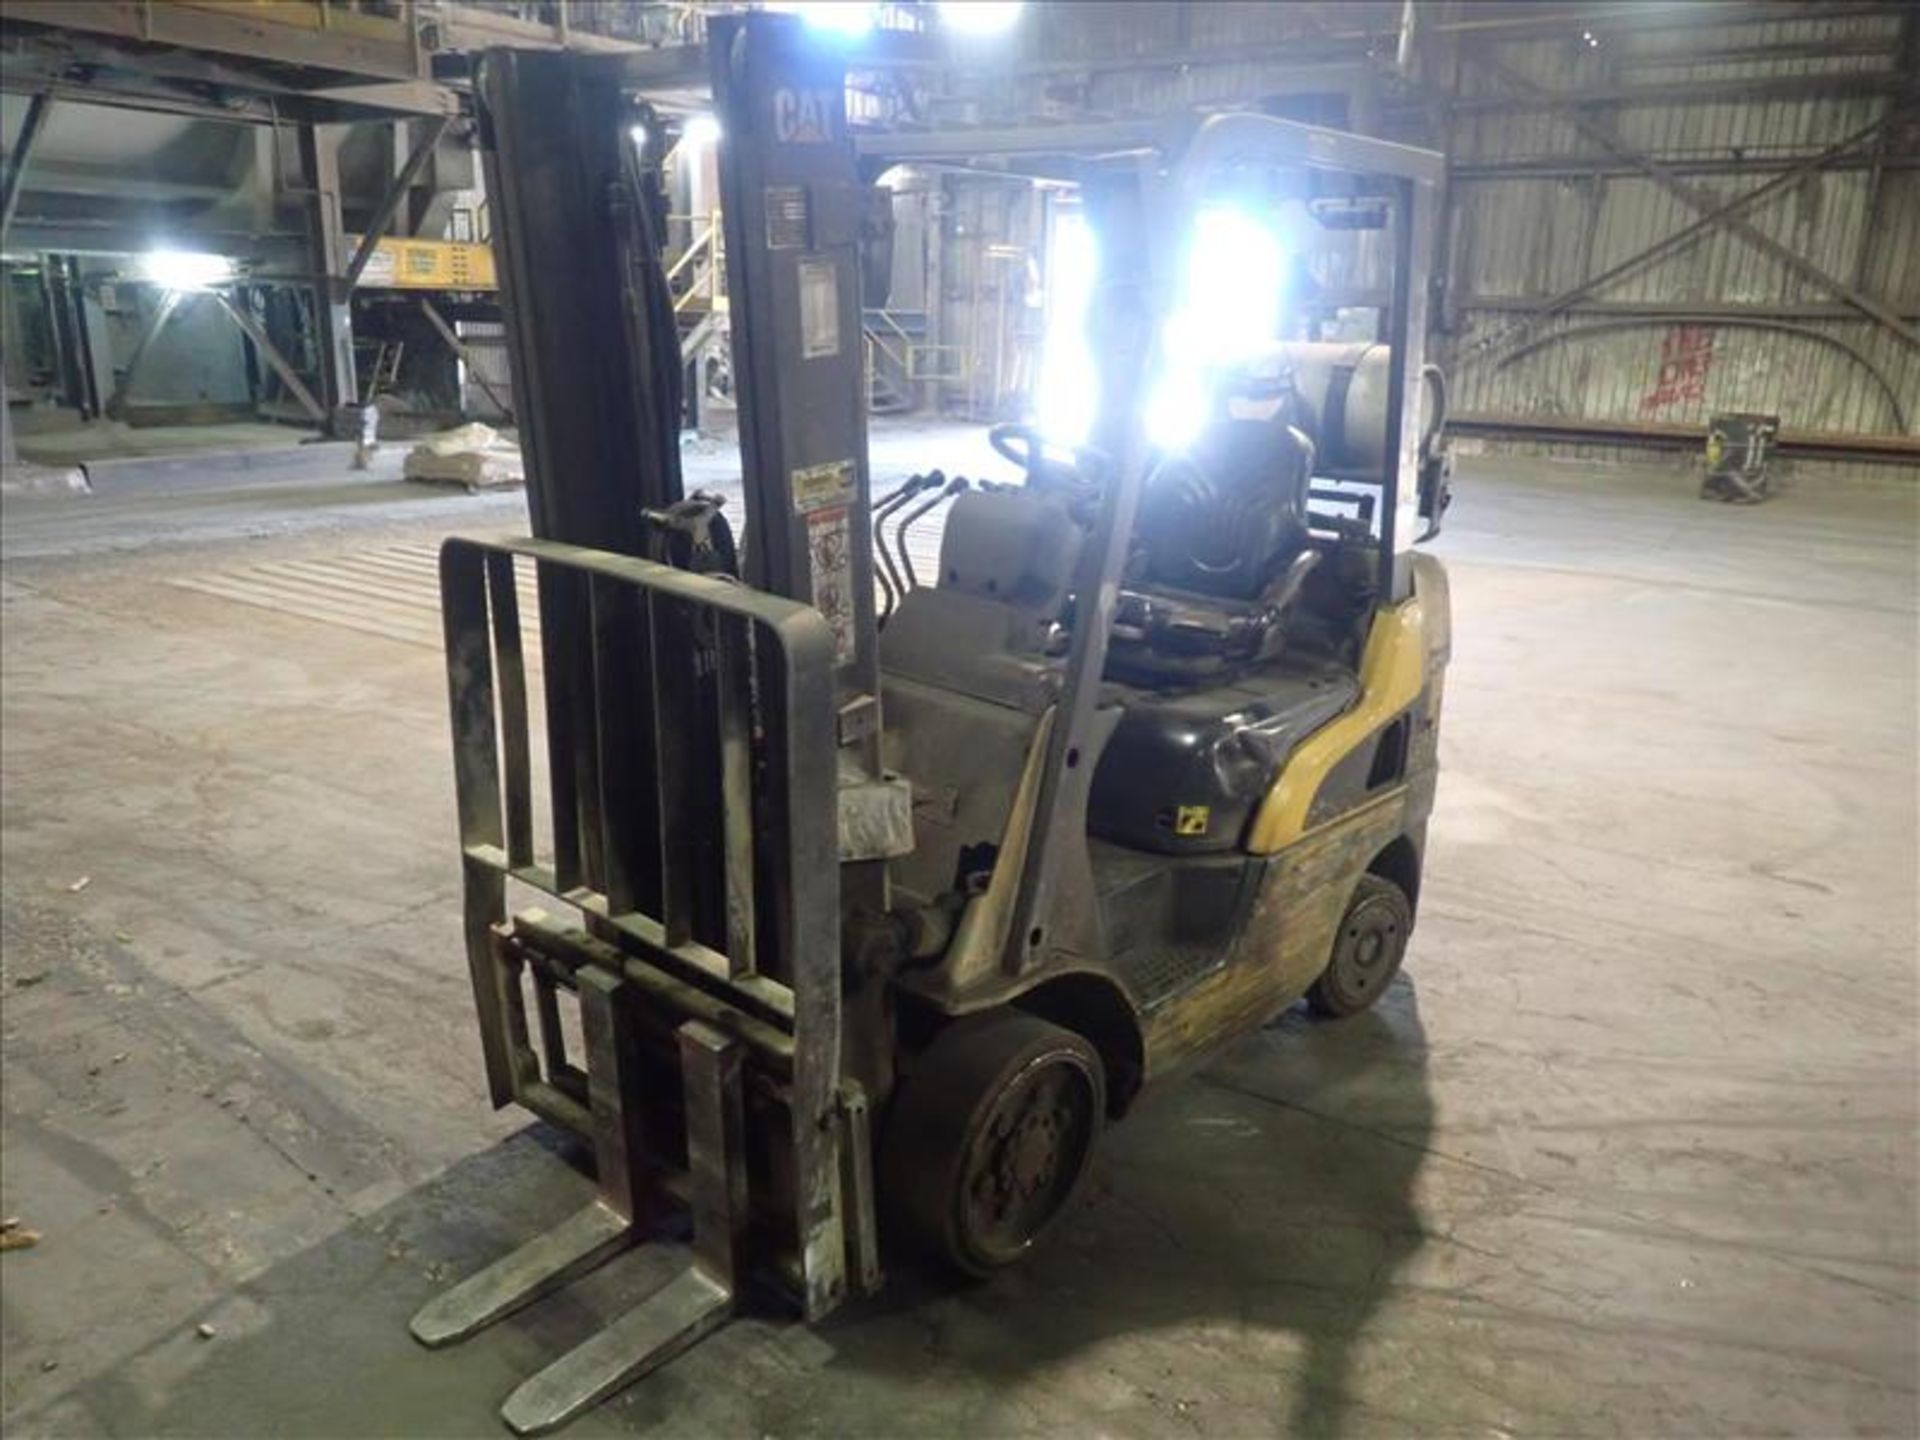 CAT forklift truck, mod. 2C5000, ser. no. N/A, N/A lbs cap., propane, 2-stage mast, side-shift, hour